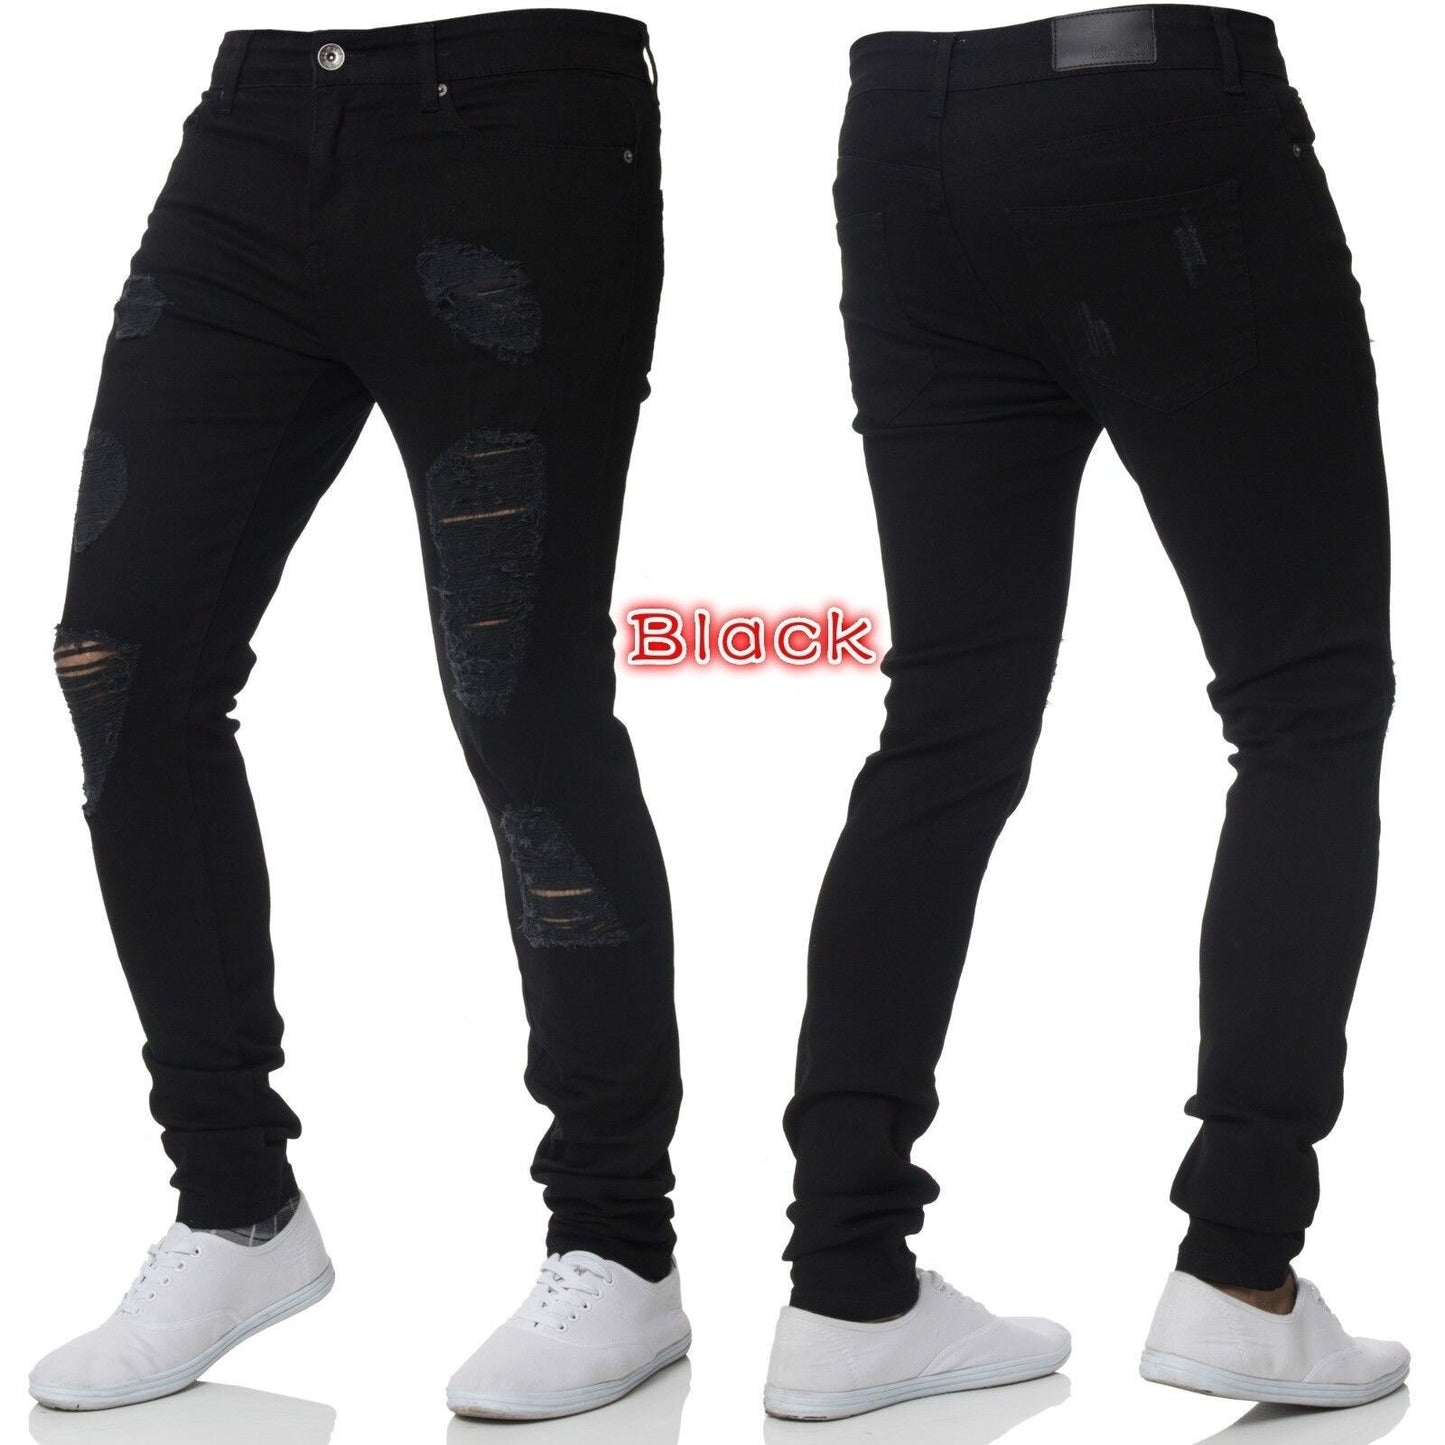 Cotton Jean Men&#39;s Pants Vintage Hole Cool Trousers for Guys Summer Europe America Style Plus Size 3XL ripped jeans Male